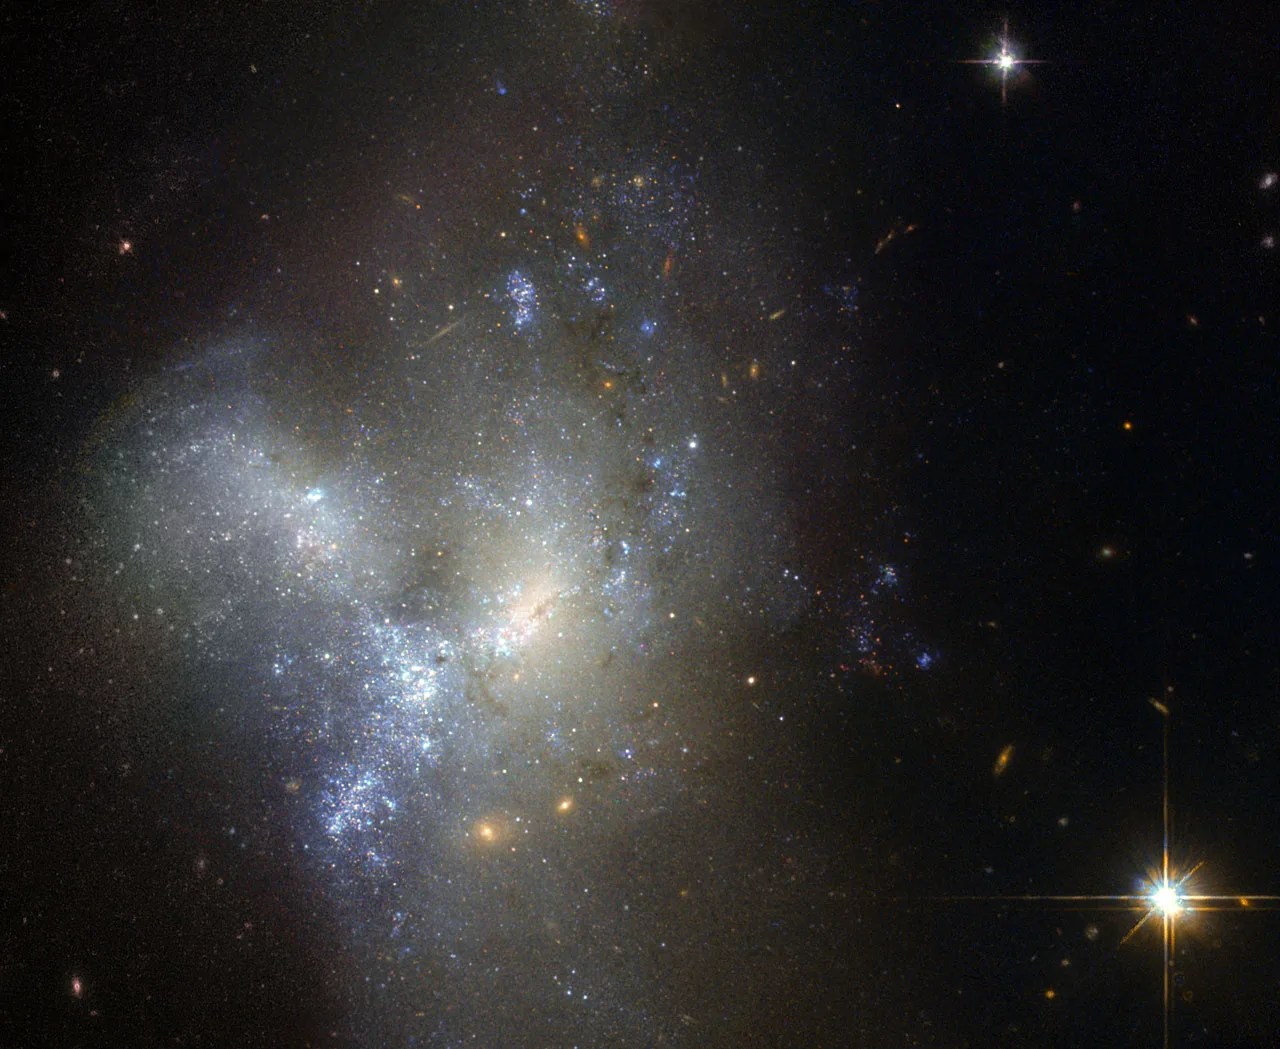 Two or more galaxies are merging together, with a glowing core and surrounded by a grayish haze of gas and many bright blue stars.